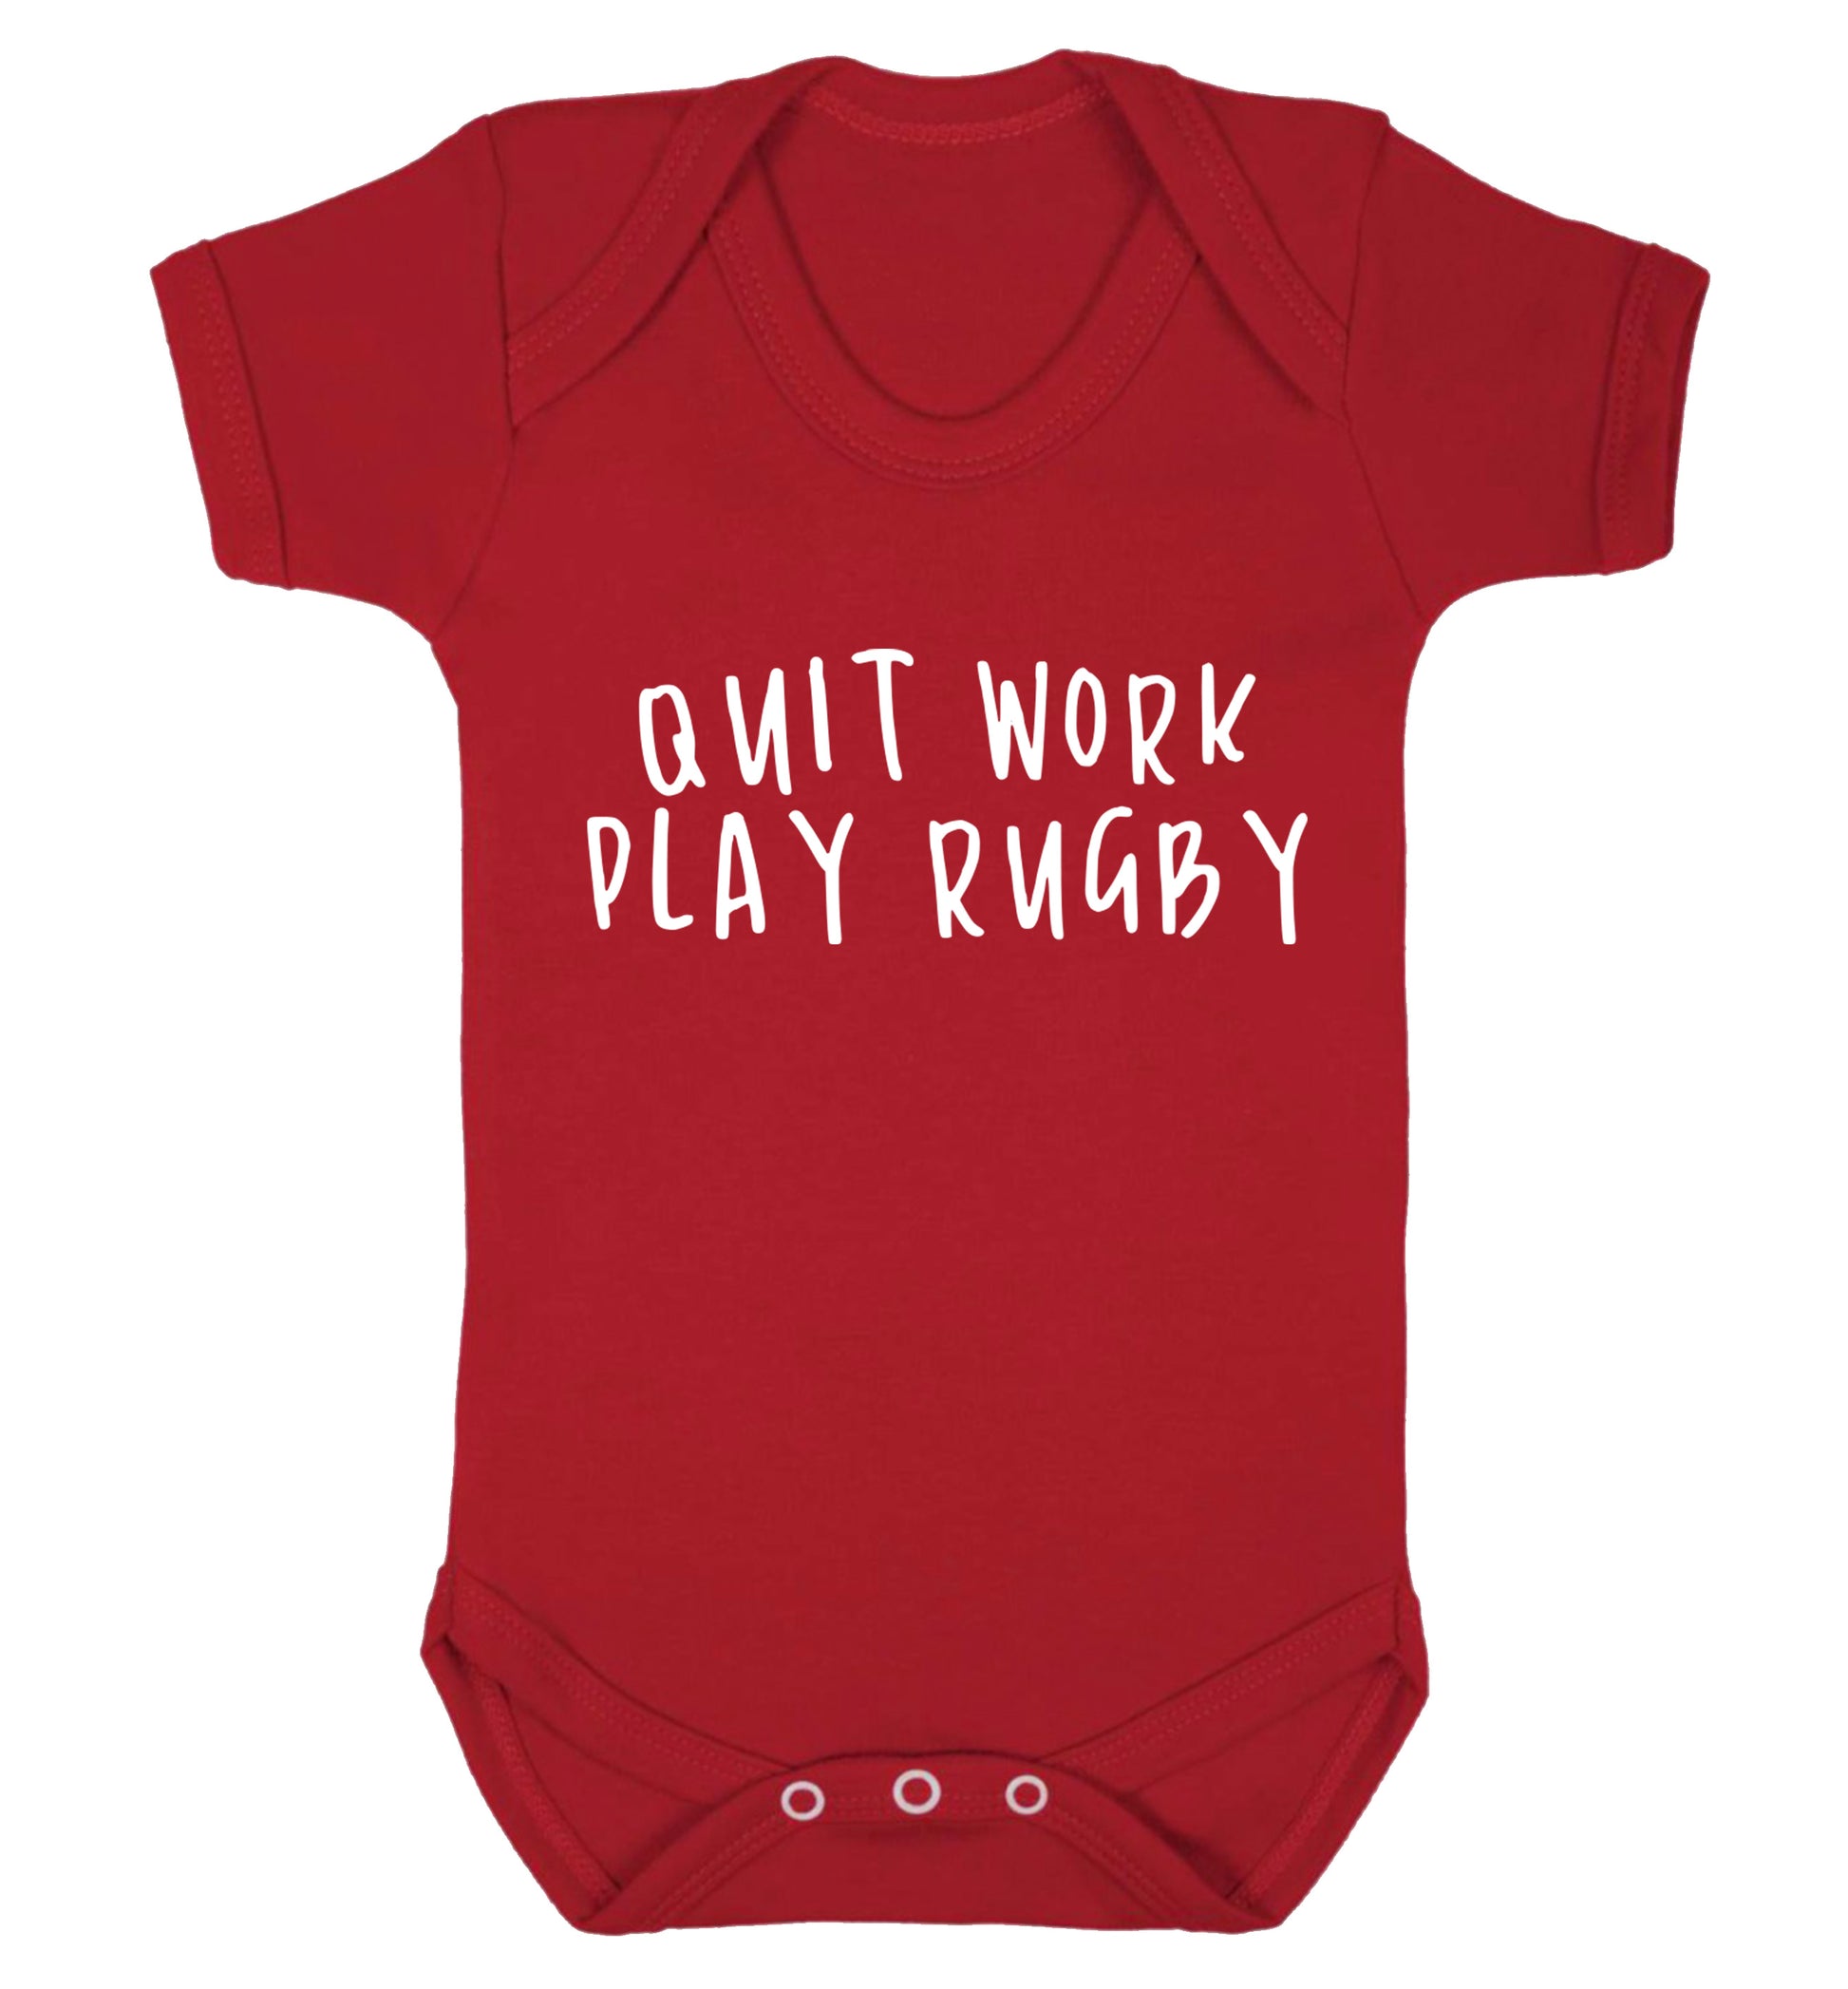 Quit work play rugby Baby Vest red 18-24 months